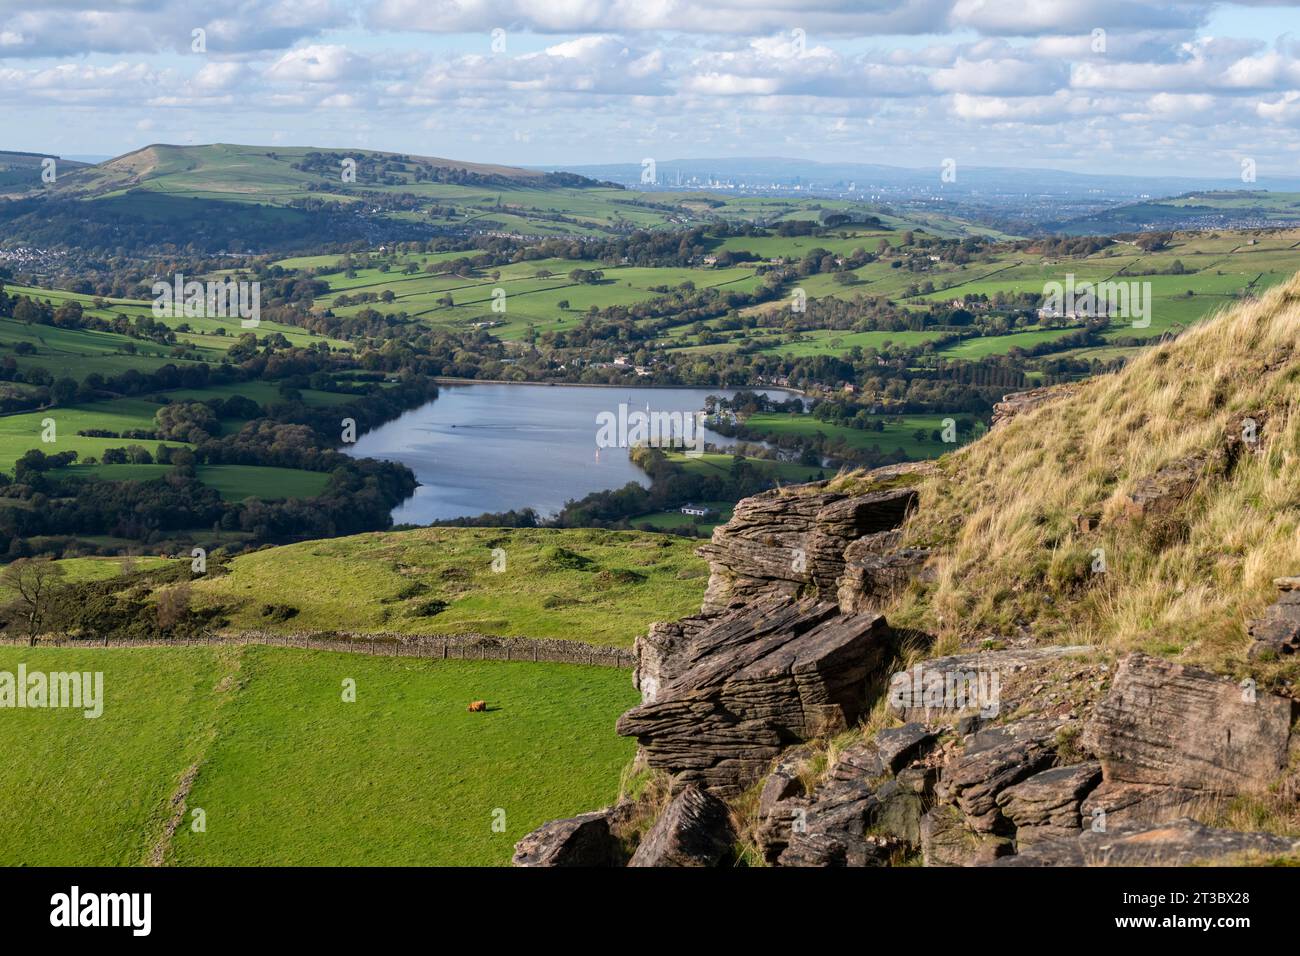 Combs reservoir seen from Combs Edge near Chapel-en-le-Frith in Derbyshire, England. Stock Photo